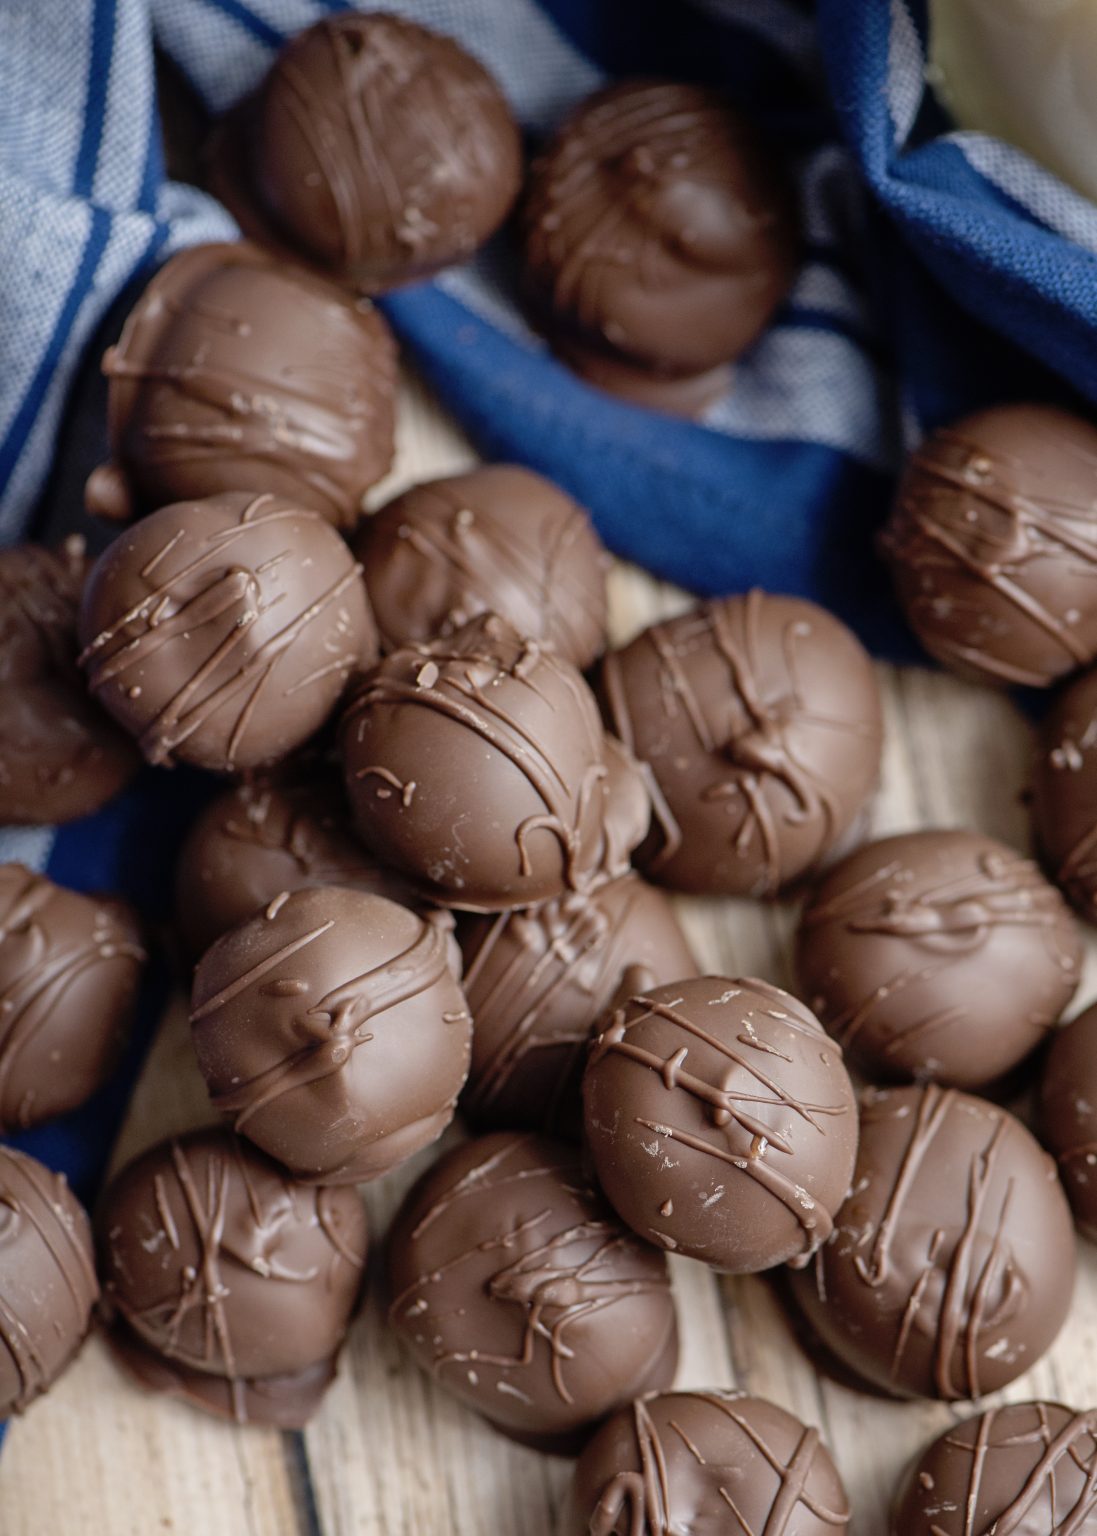 Chocolate Covered Peanut Butter Balls - 4 Sons 'R' Us